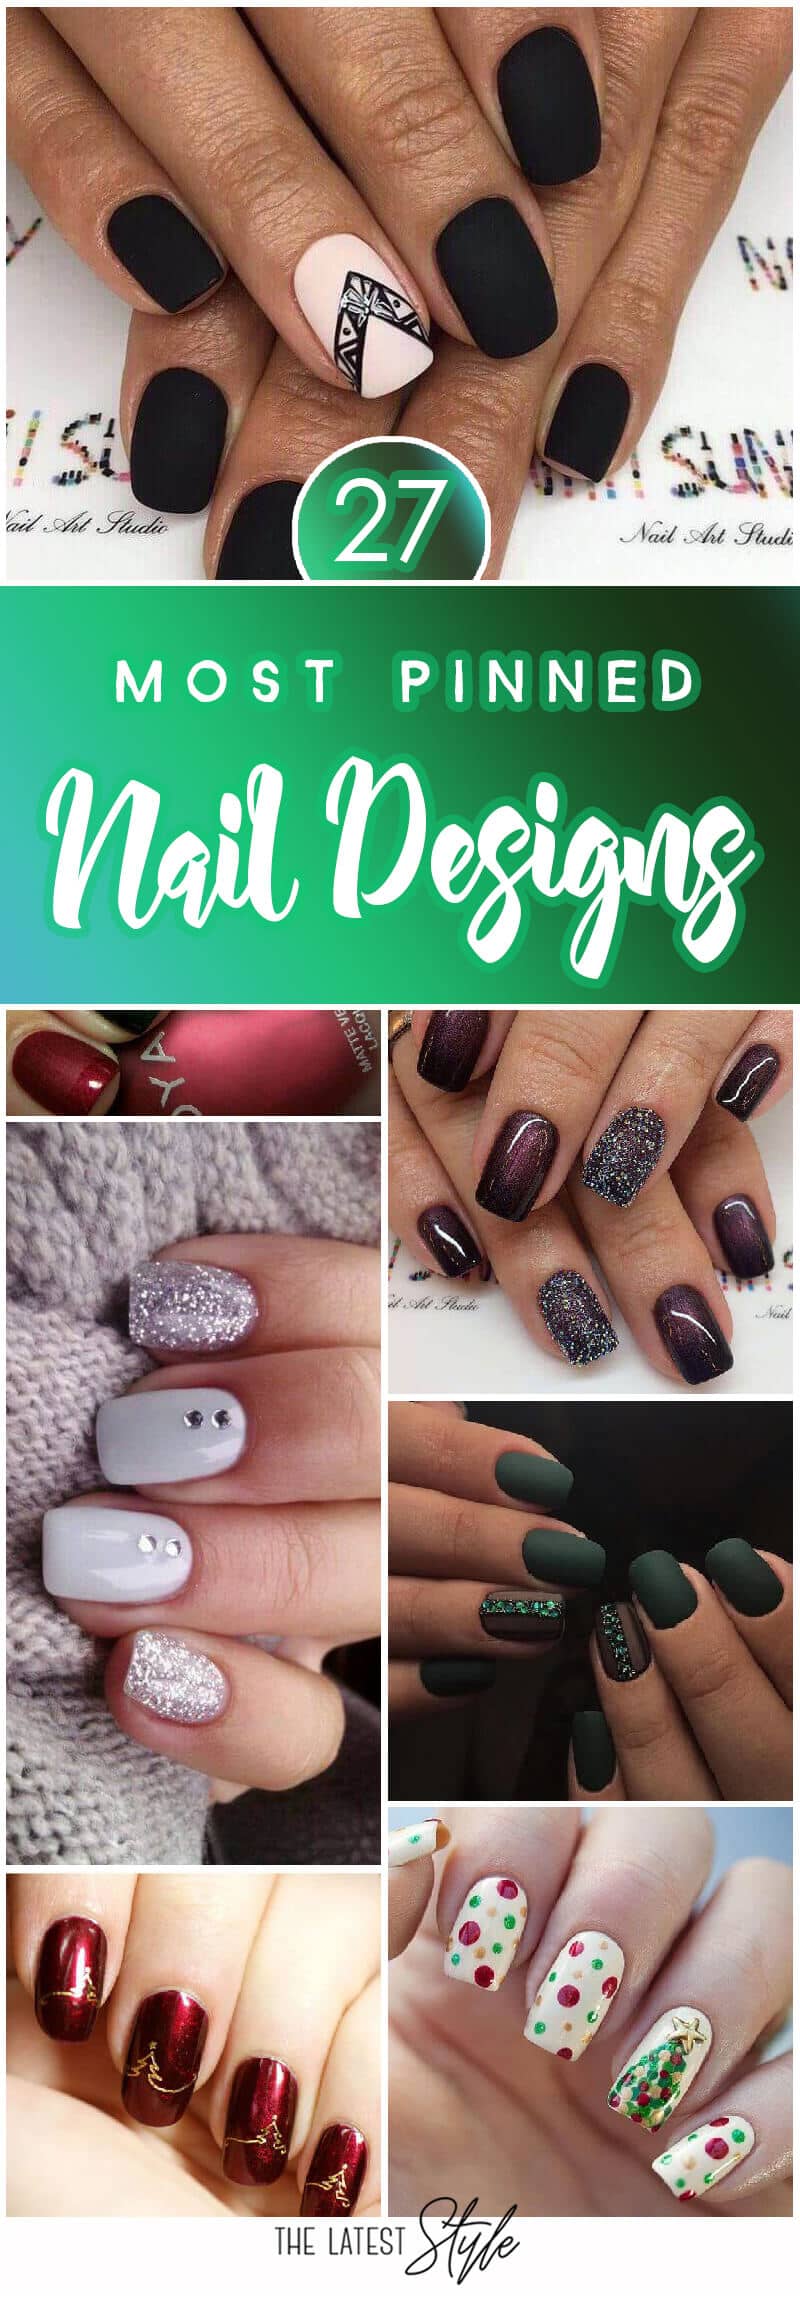 27 of the Most Pinned Nail Design Ideas to Start the Year with Style